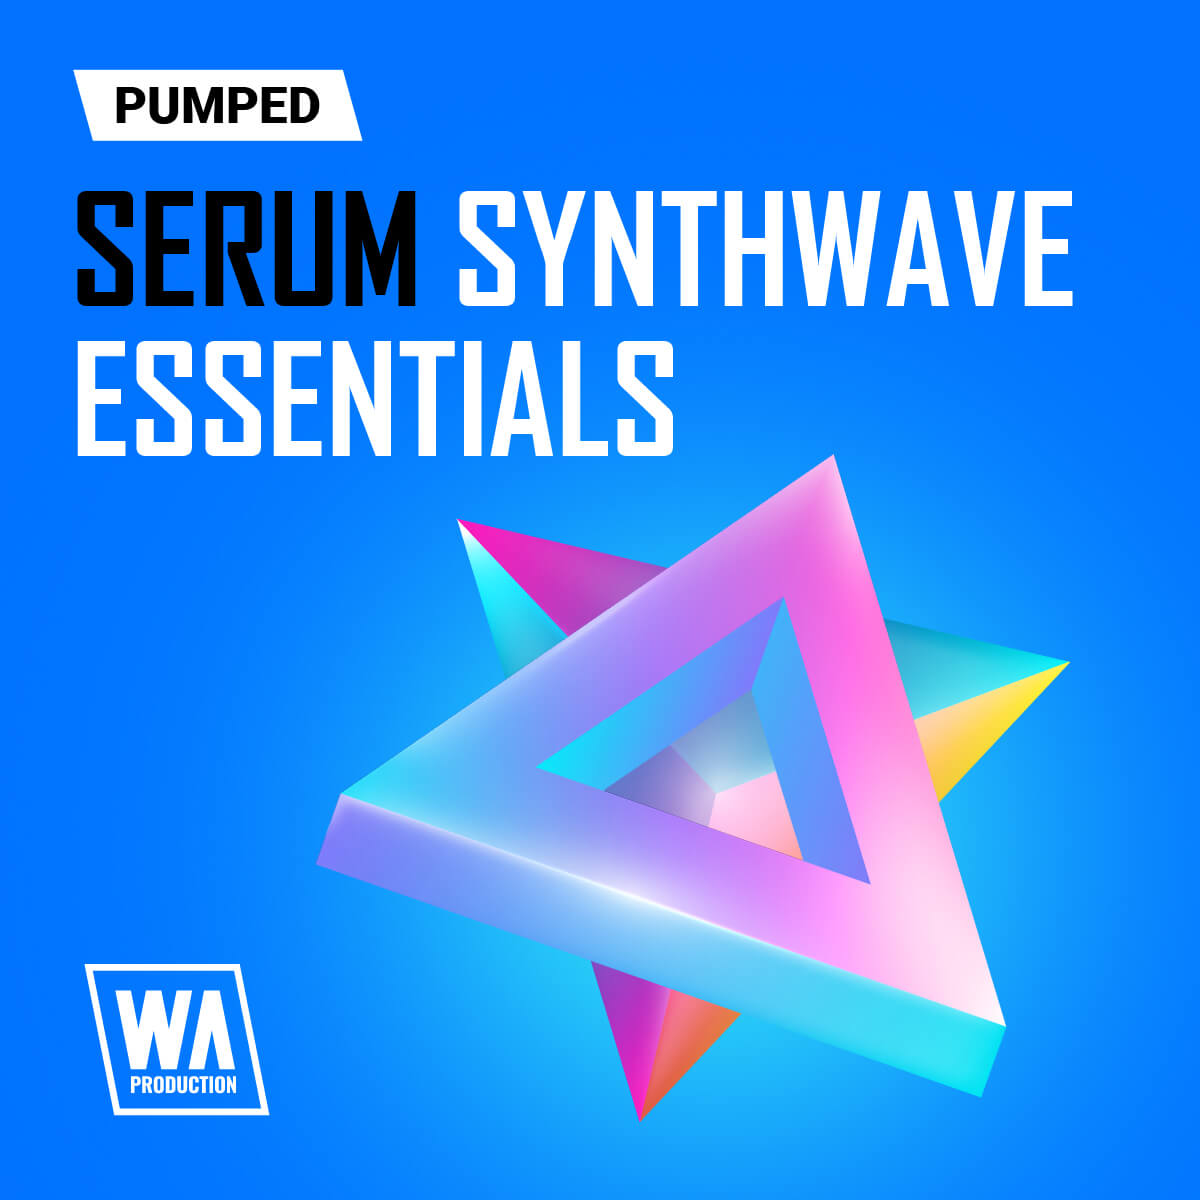 W.A. Production Pumped: Serum Synthwave Essentials